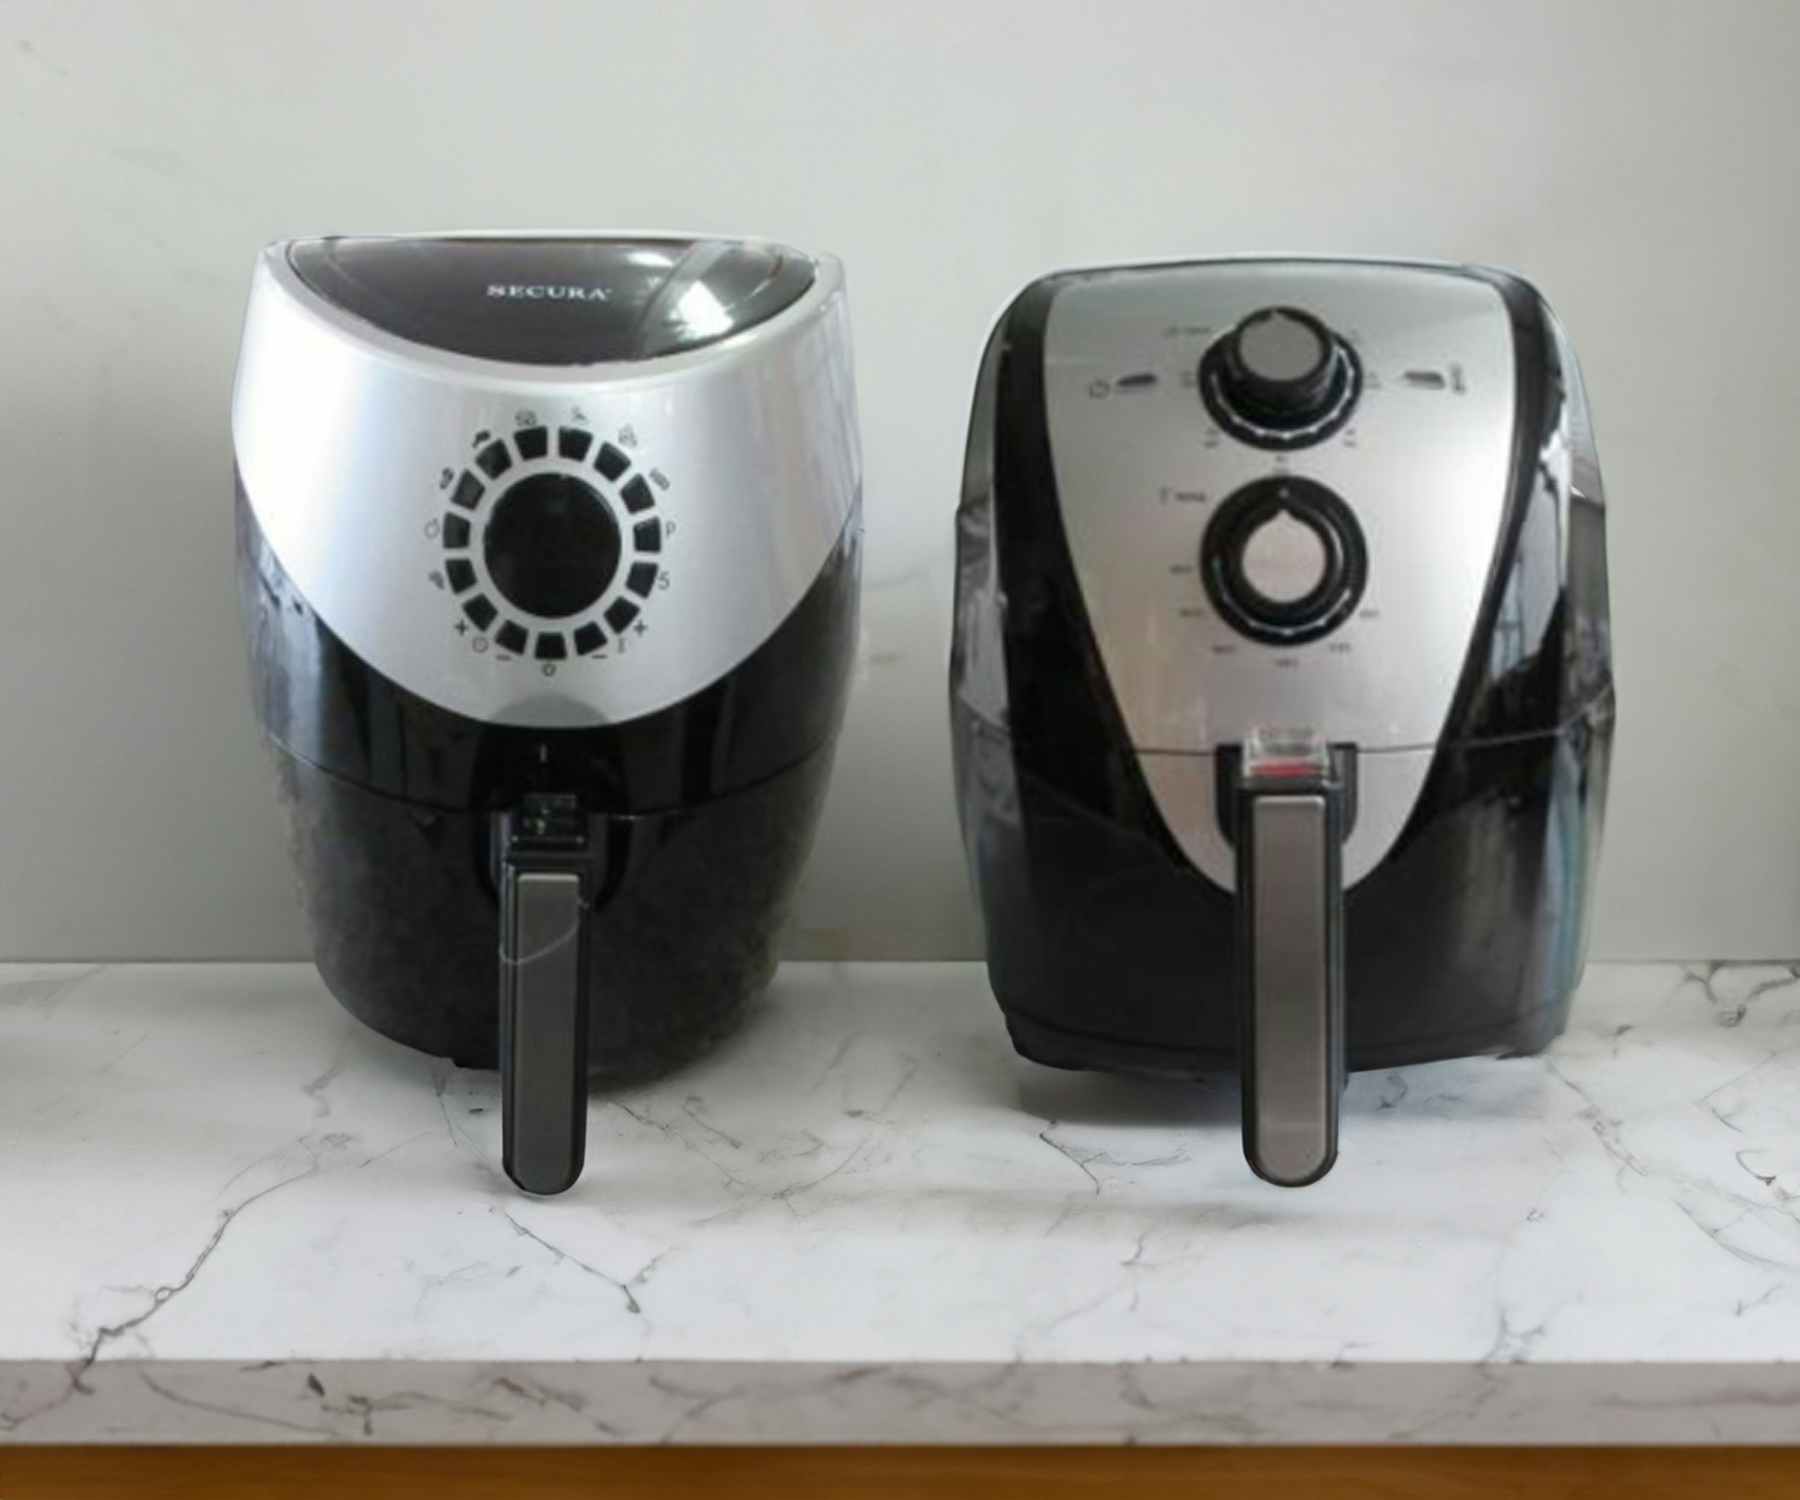 The two models of Secura air fryers recalled in 2023